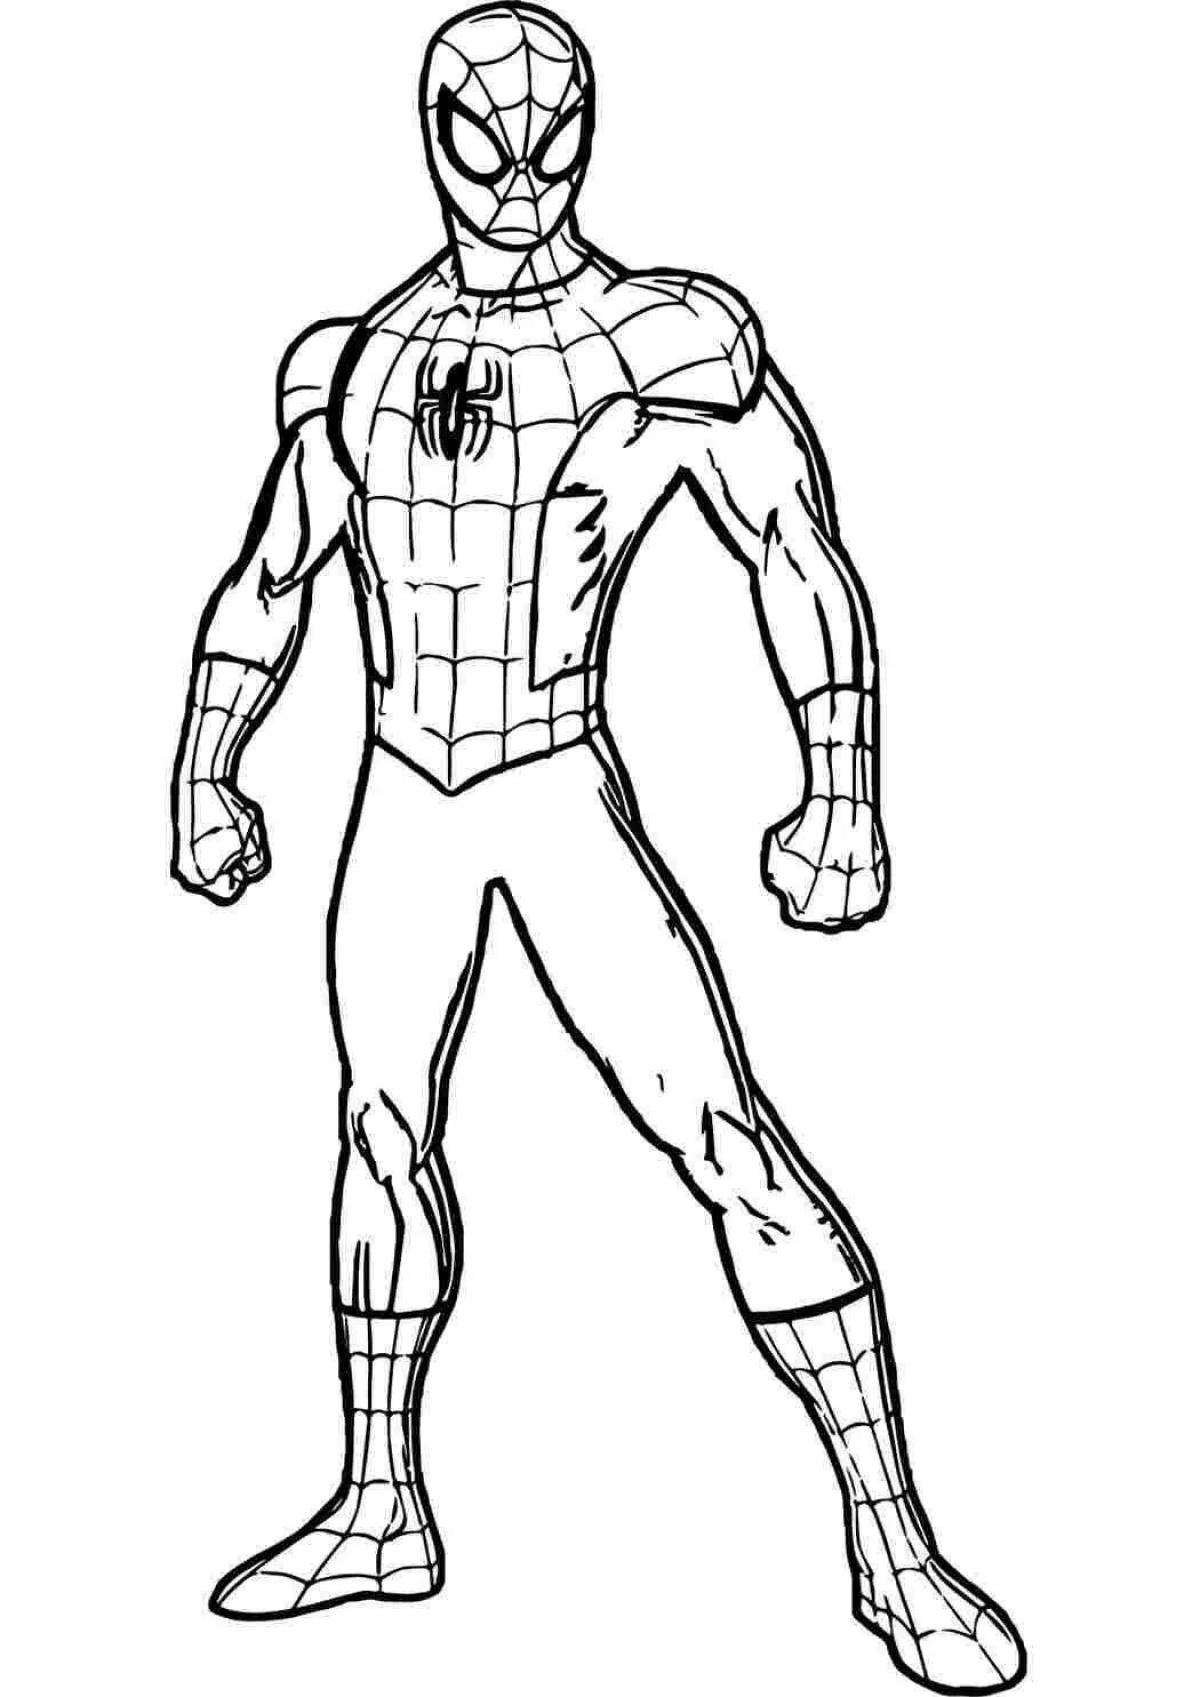 Living spiderman and iron man coloring pages for kids